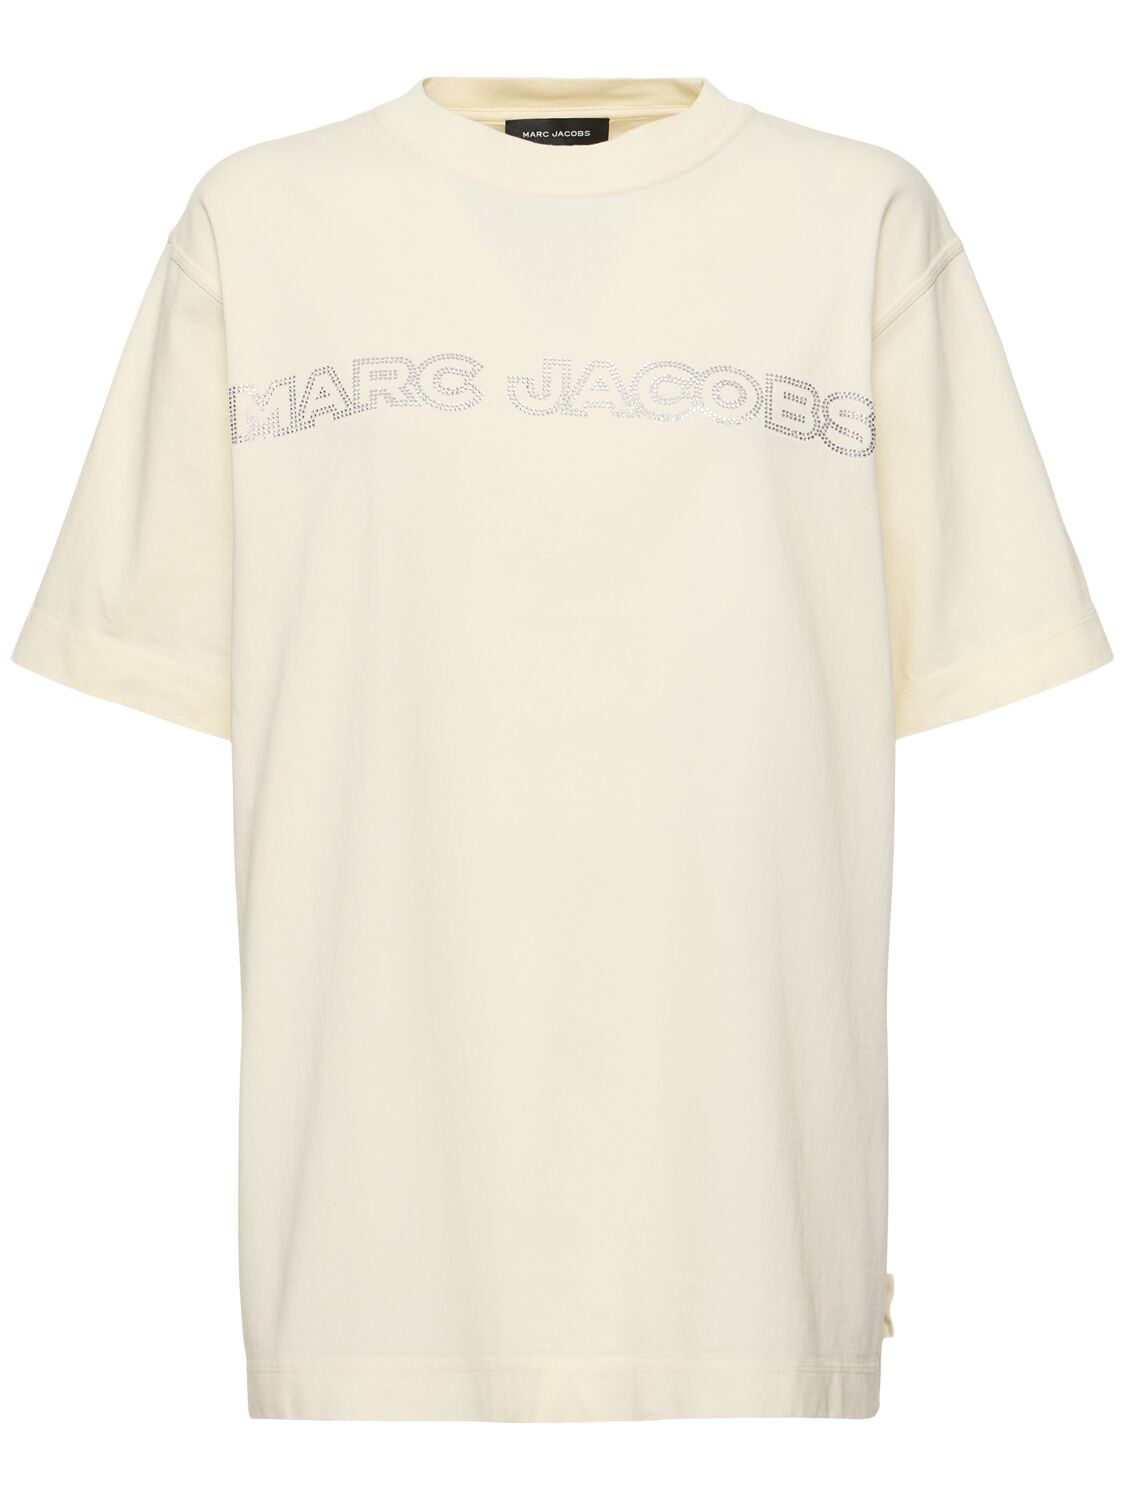 Marc Jacobs Crystal Big T-shirt In Antique White